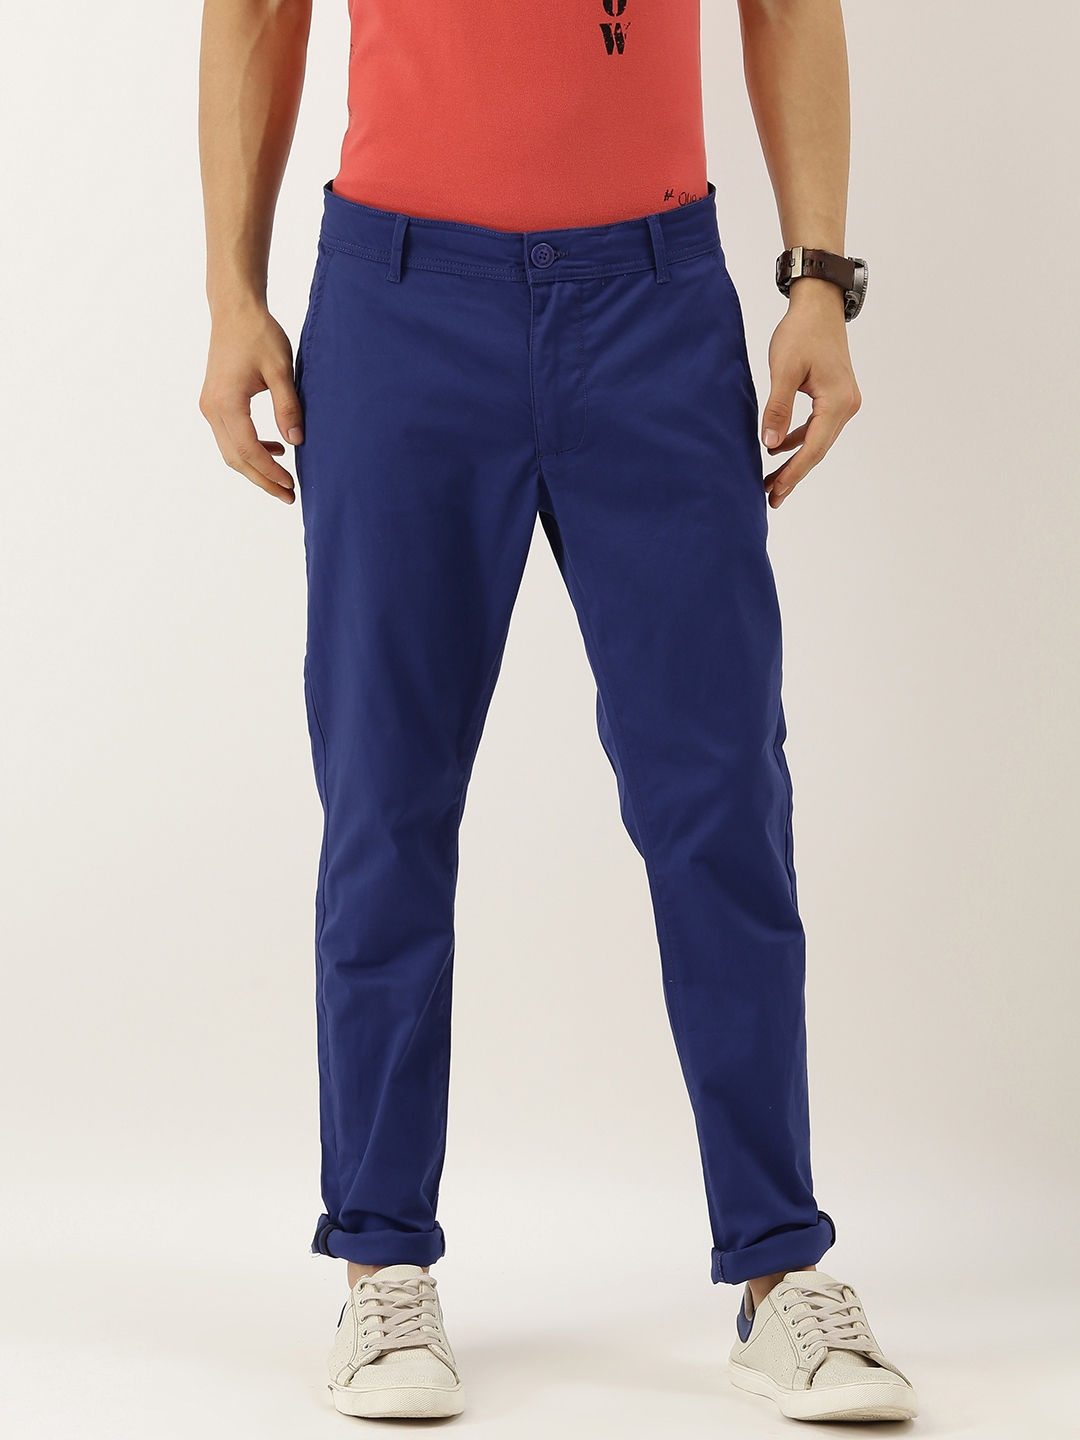 Buy Being Human Clothing Men Navy Blue Regular Fit Solid Chinos ...